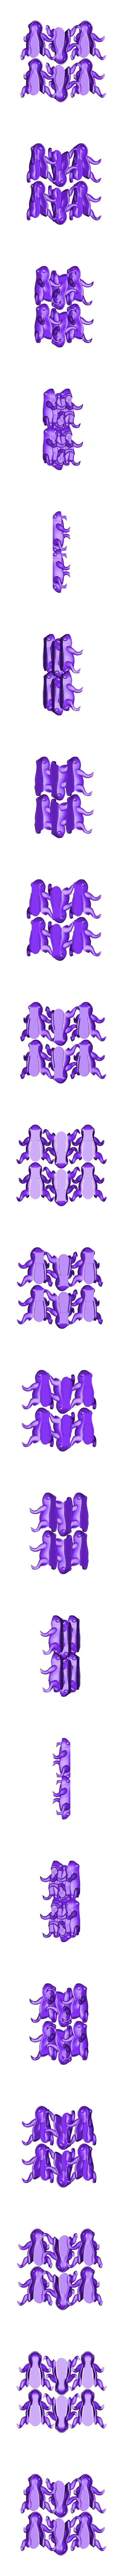 Jumping_Frogs_6_Frogs.stl Download free STL file Jumping Frogs Game • 3D printable template, JonathanK1906